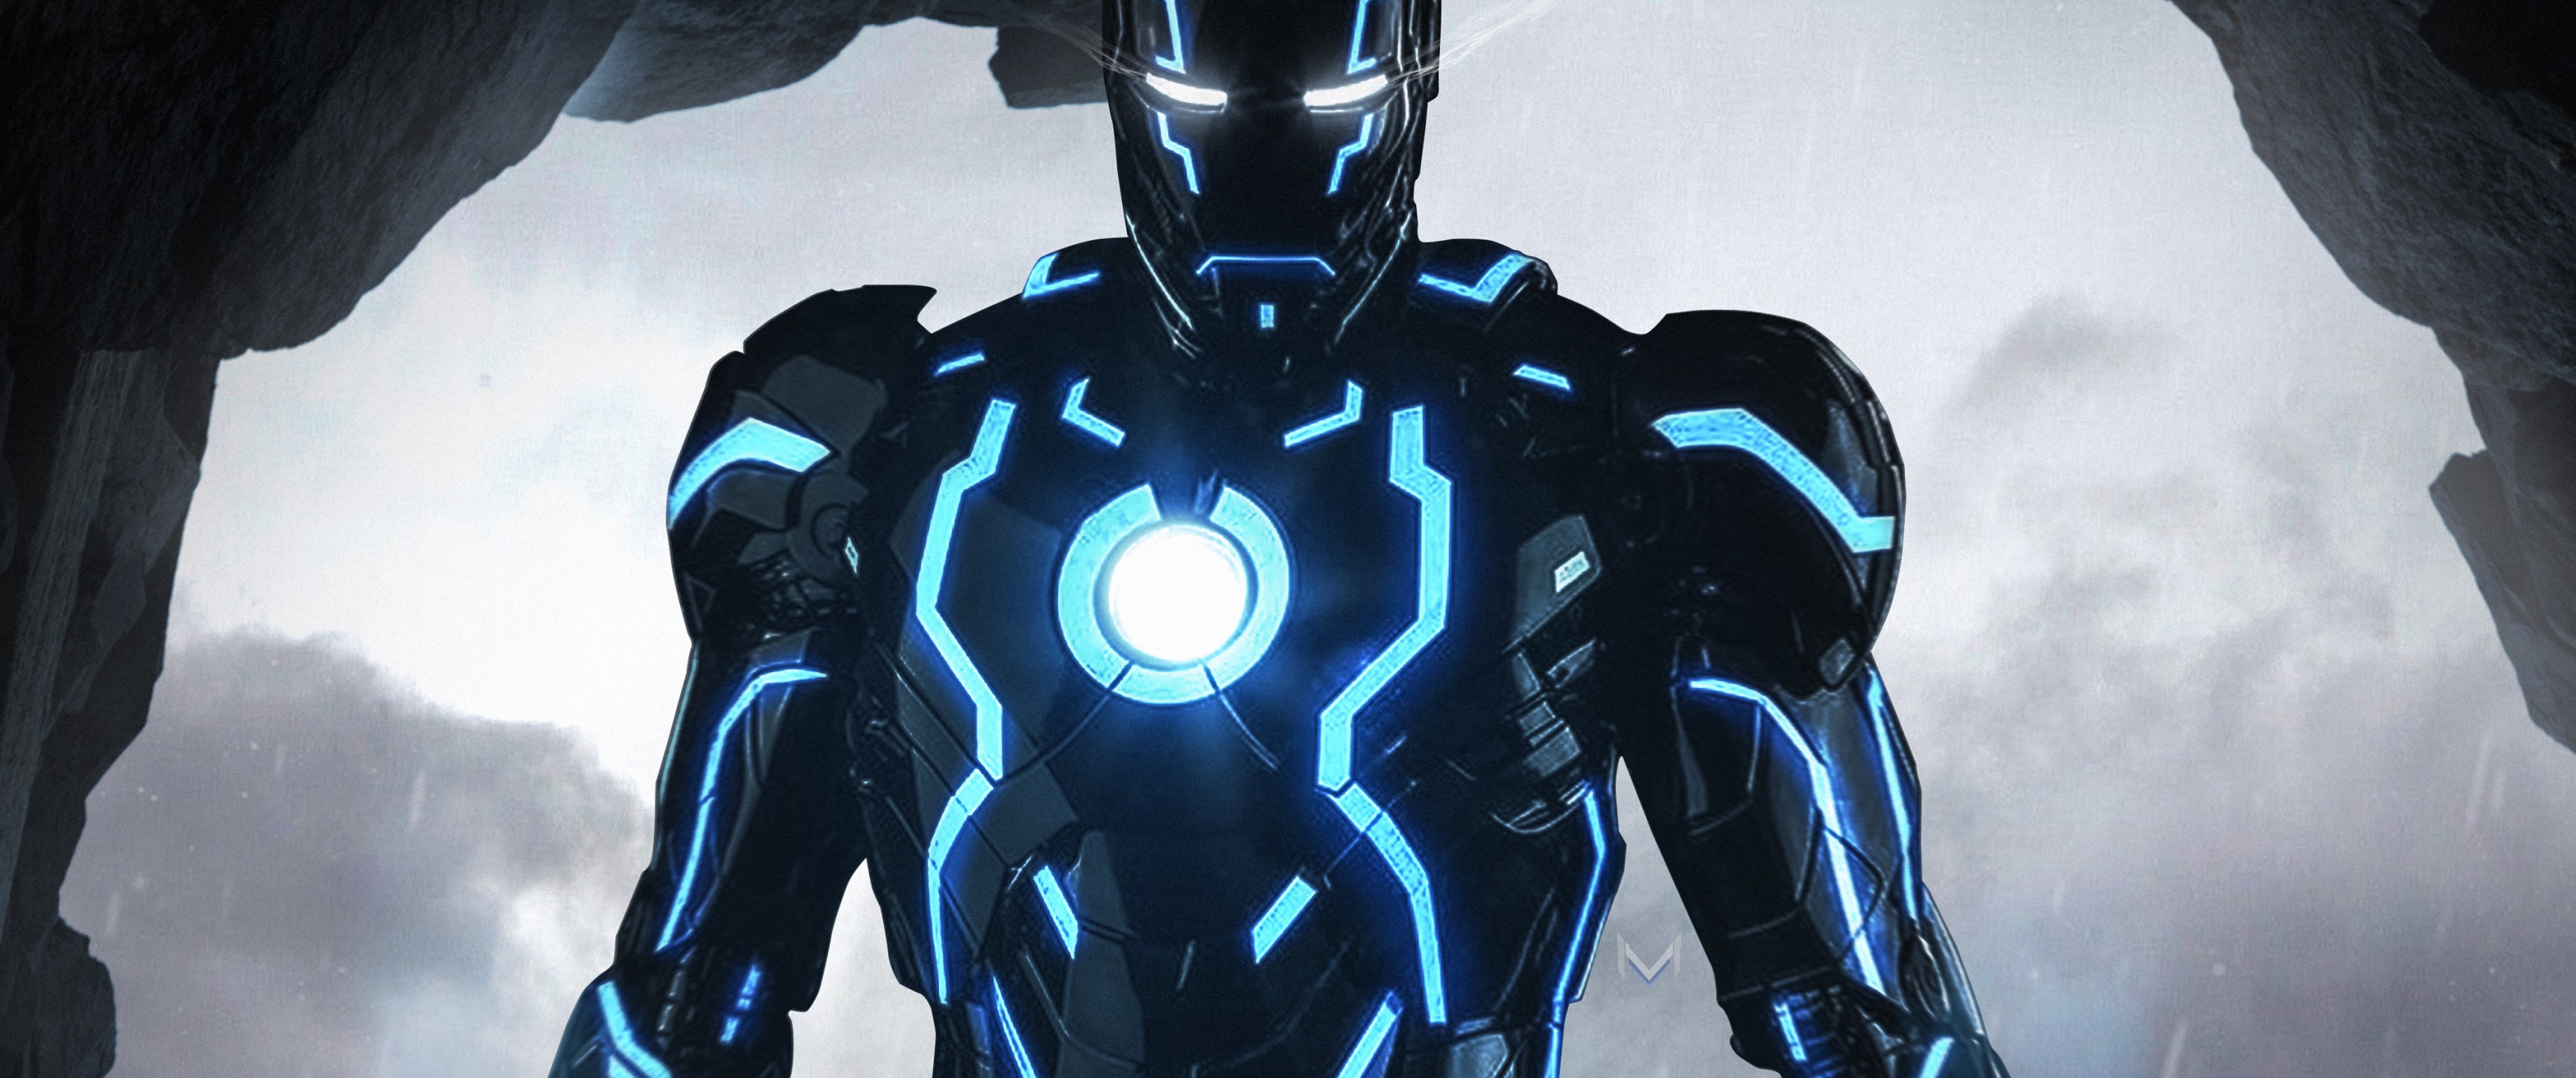 Neon Iron Man 4K Wallpaper 3440x1440 Hot Desktop and background for your PC and mobile